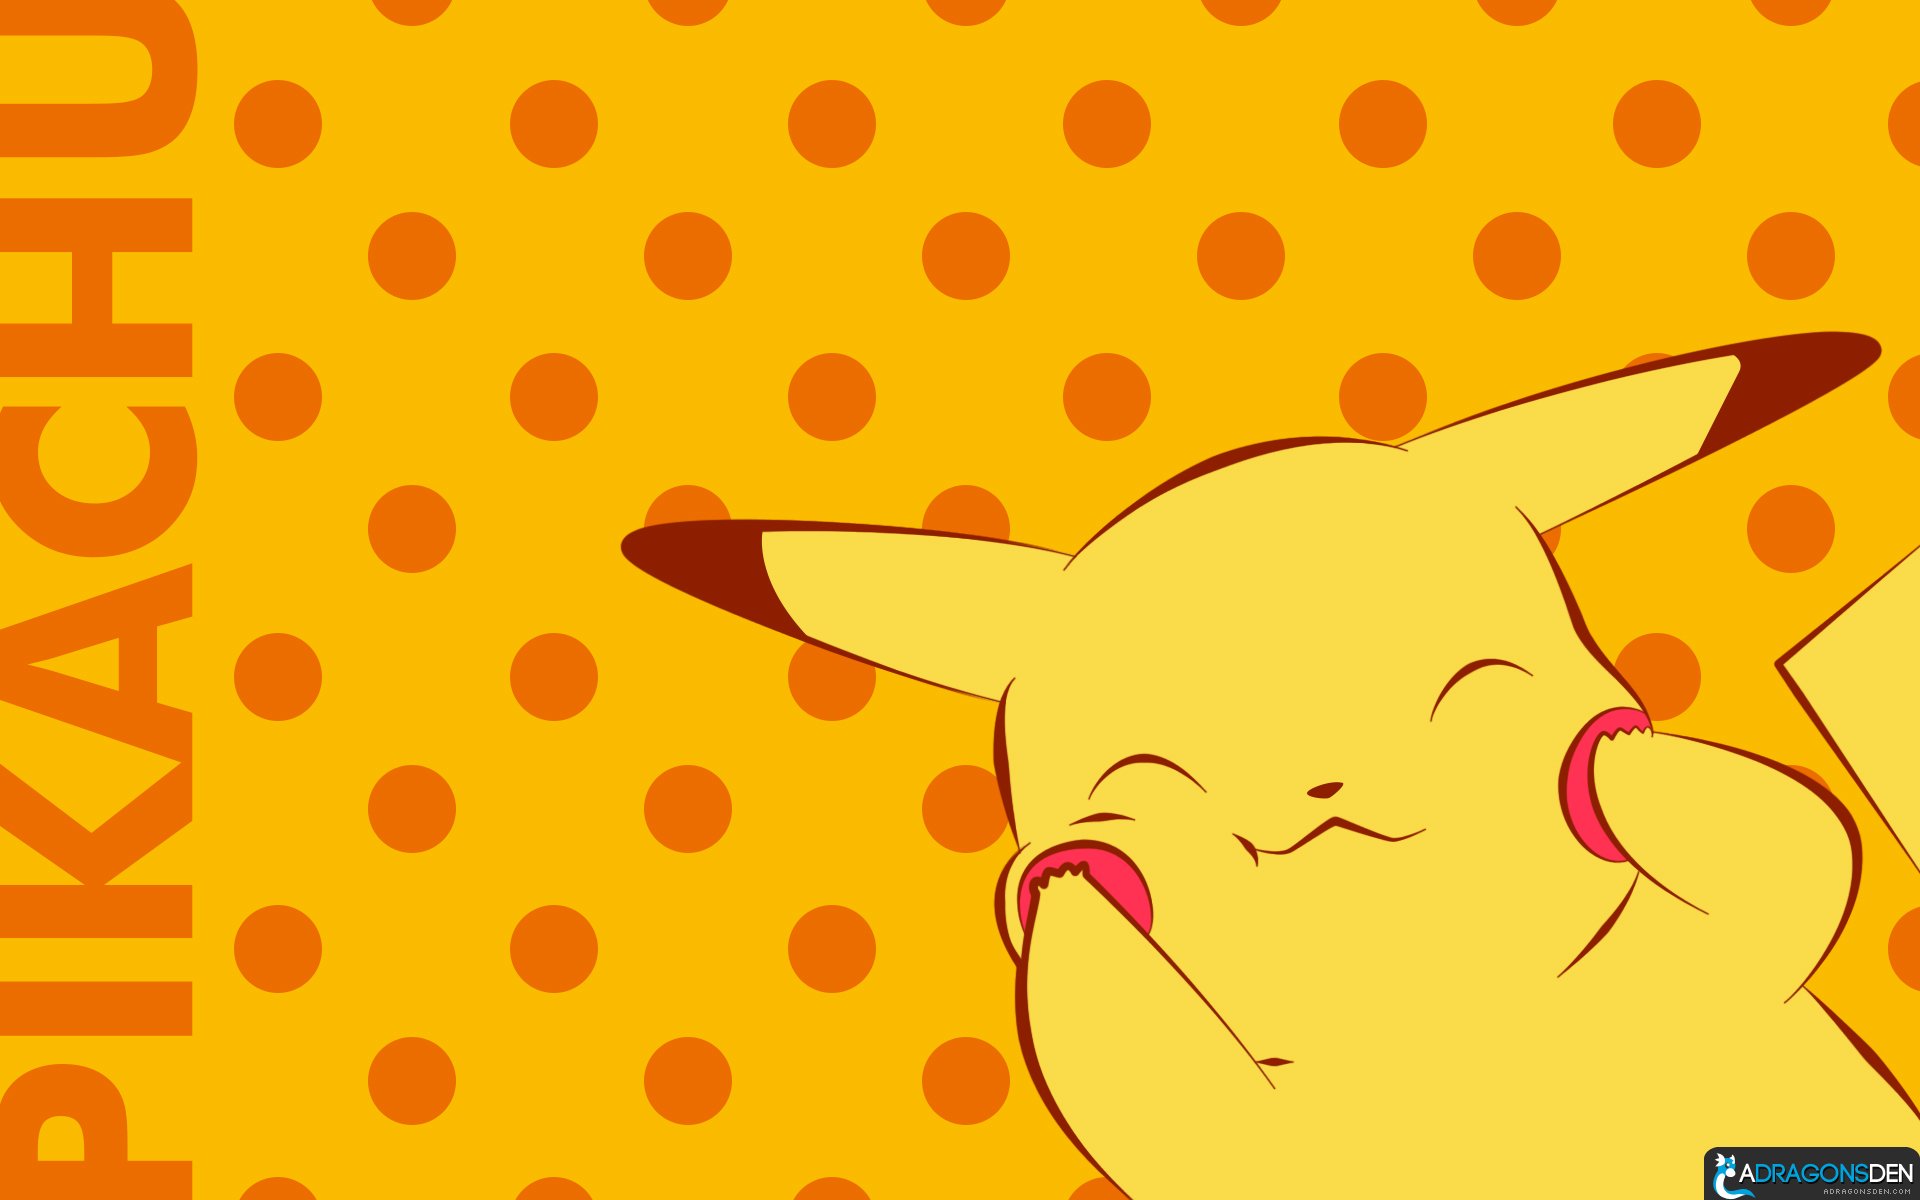 Oh! That Silly Face! by BBShadowCat HD Wallpaper